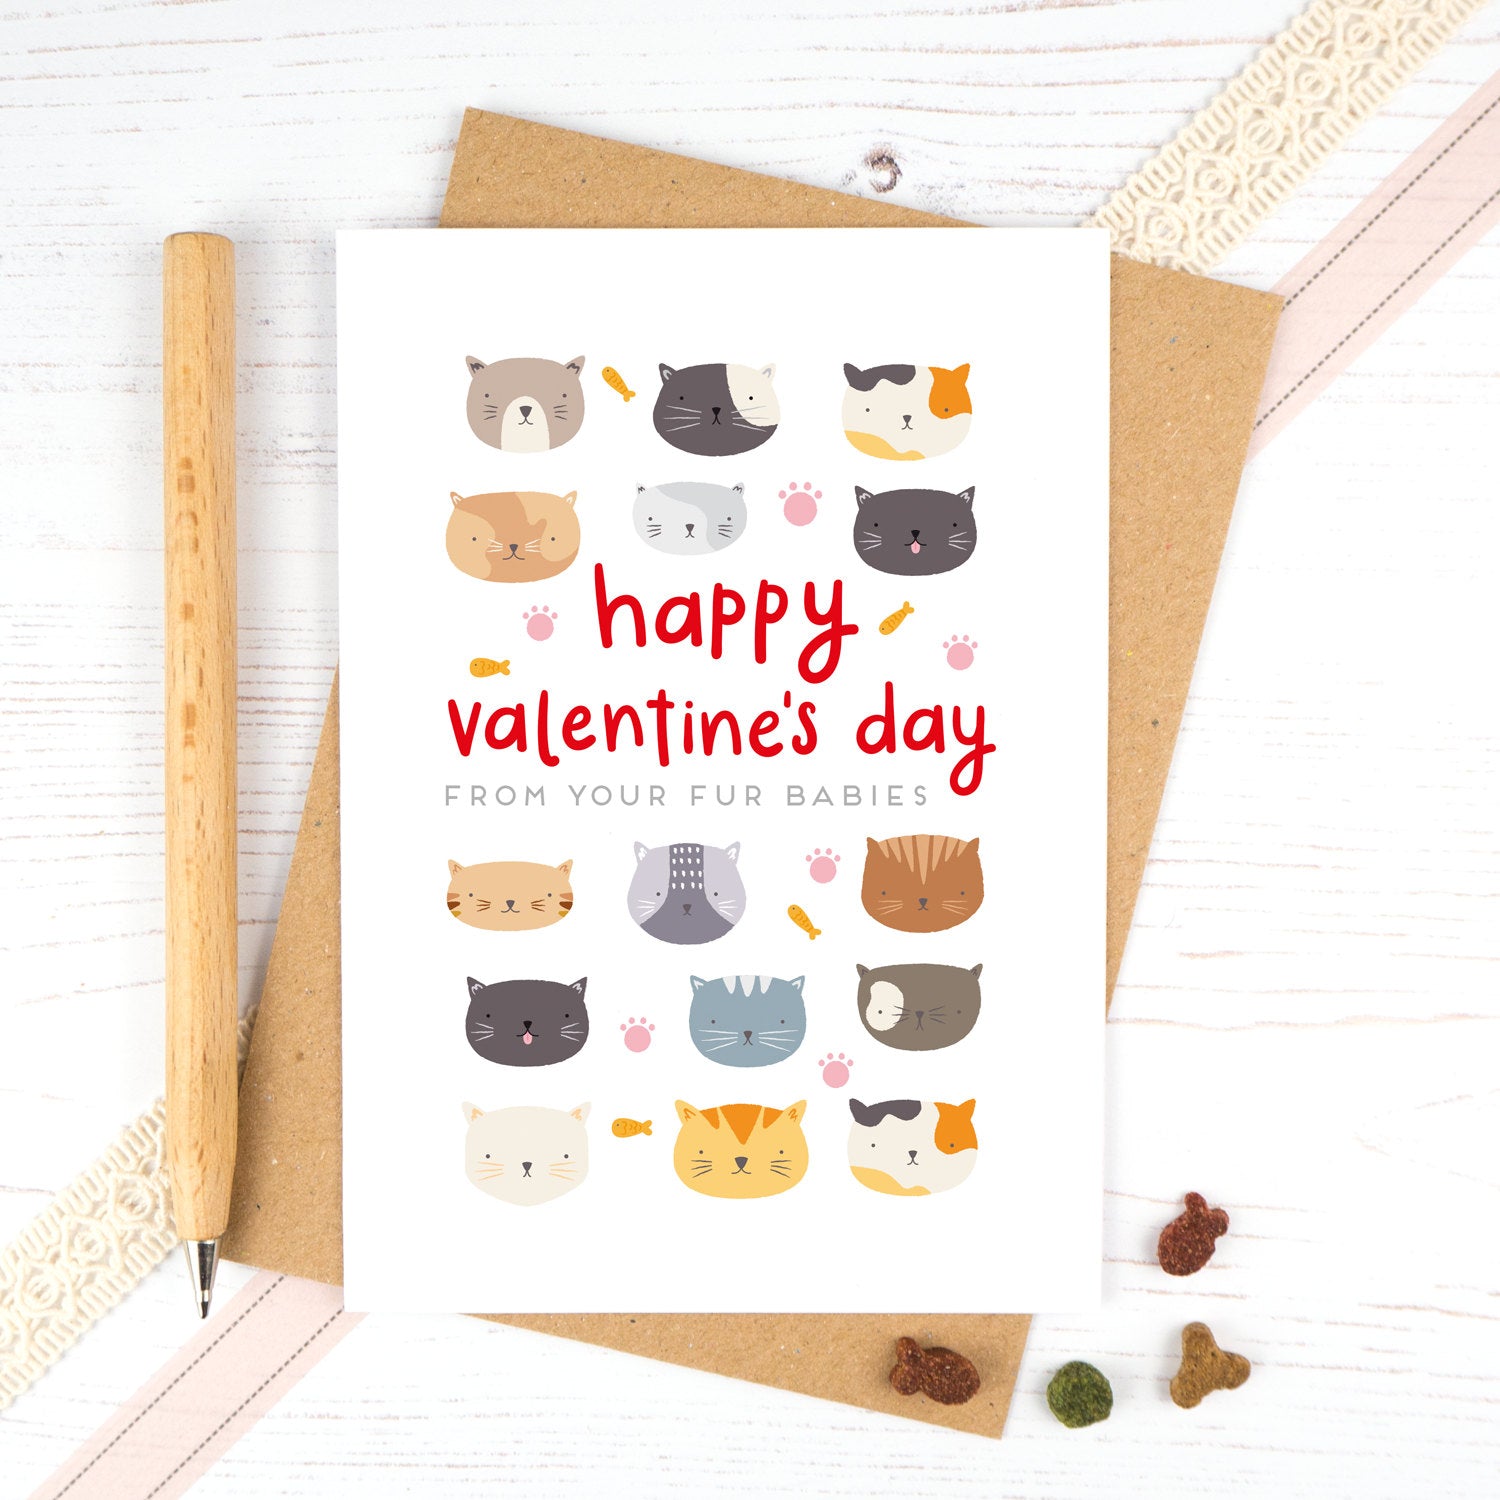 A valentines card from the cat. Happy Valentines day from your fur babies.